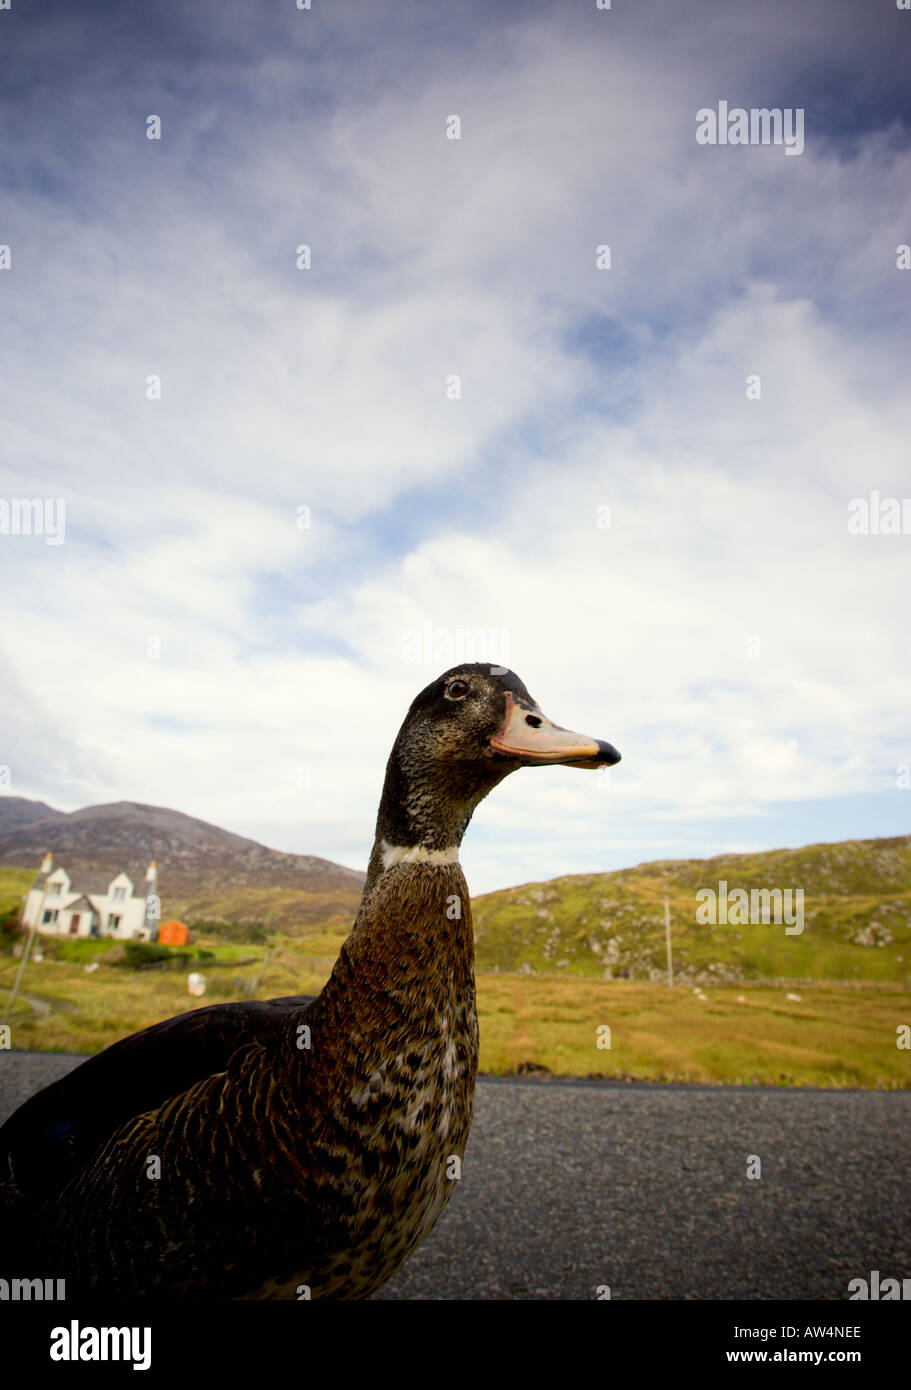 Duck standing on a country road Stock Photo